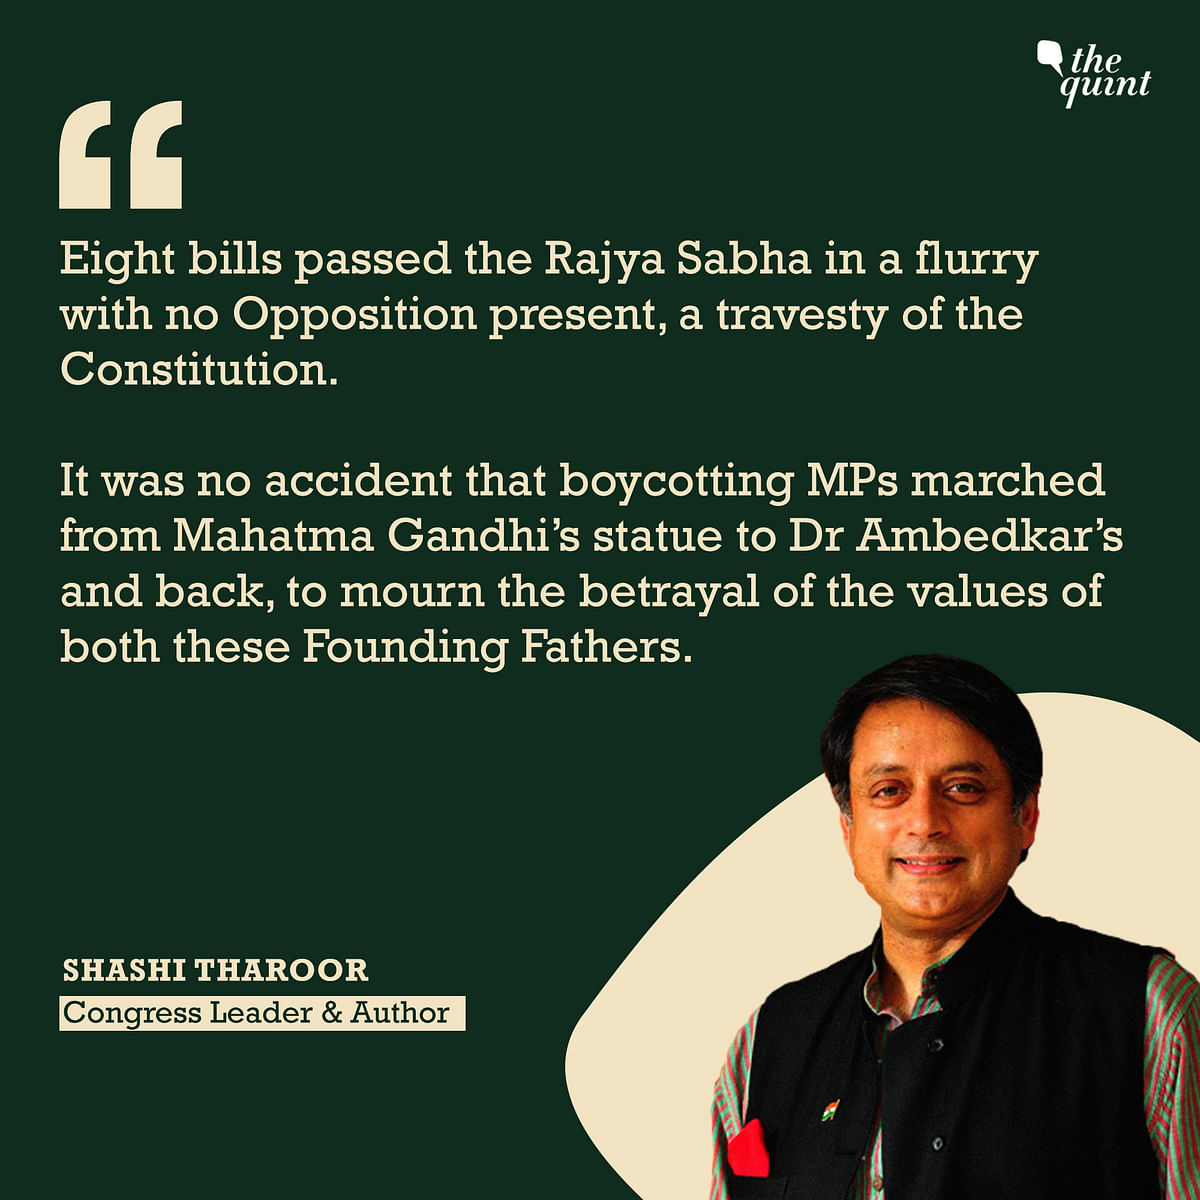 “If the assault on institutions like Parliament persists, people’s confidence will erode,” writes Dr Shashi Tharoor.